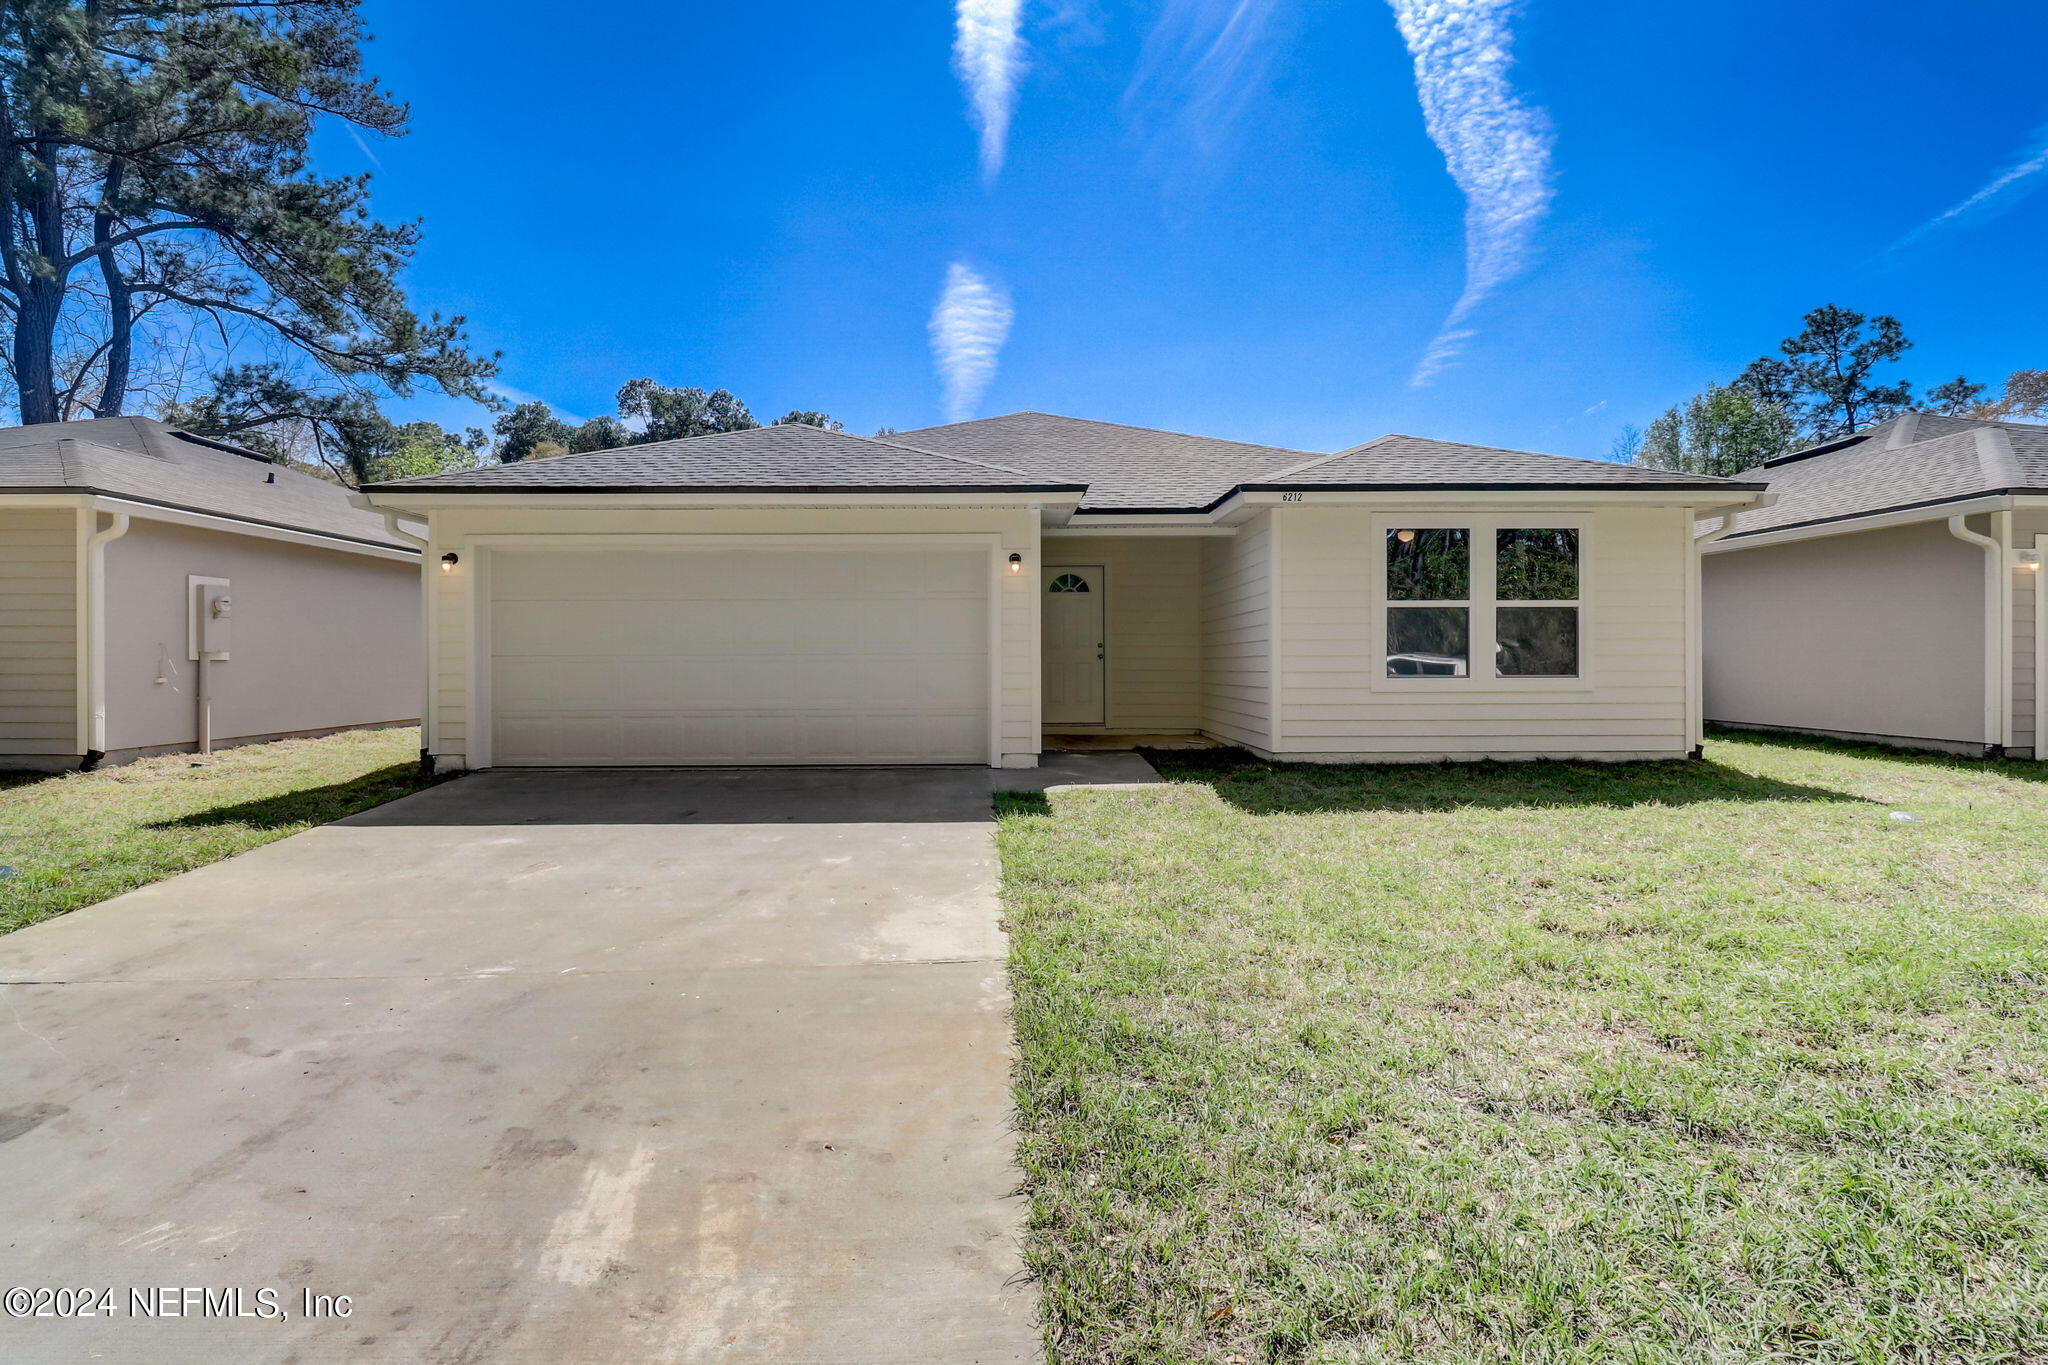 Jacksonville, FL home for sale located at 6215 W Moncrief Road, Jacksonville, FL 32209